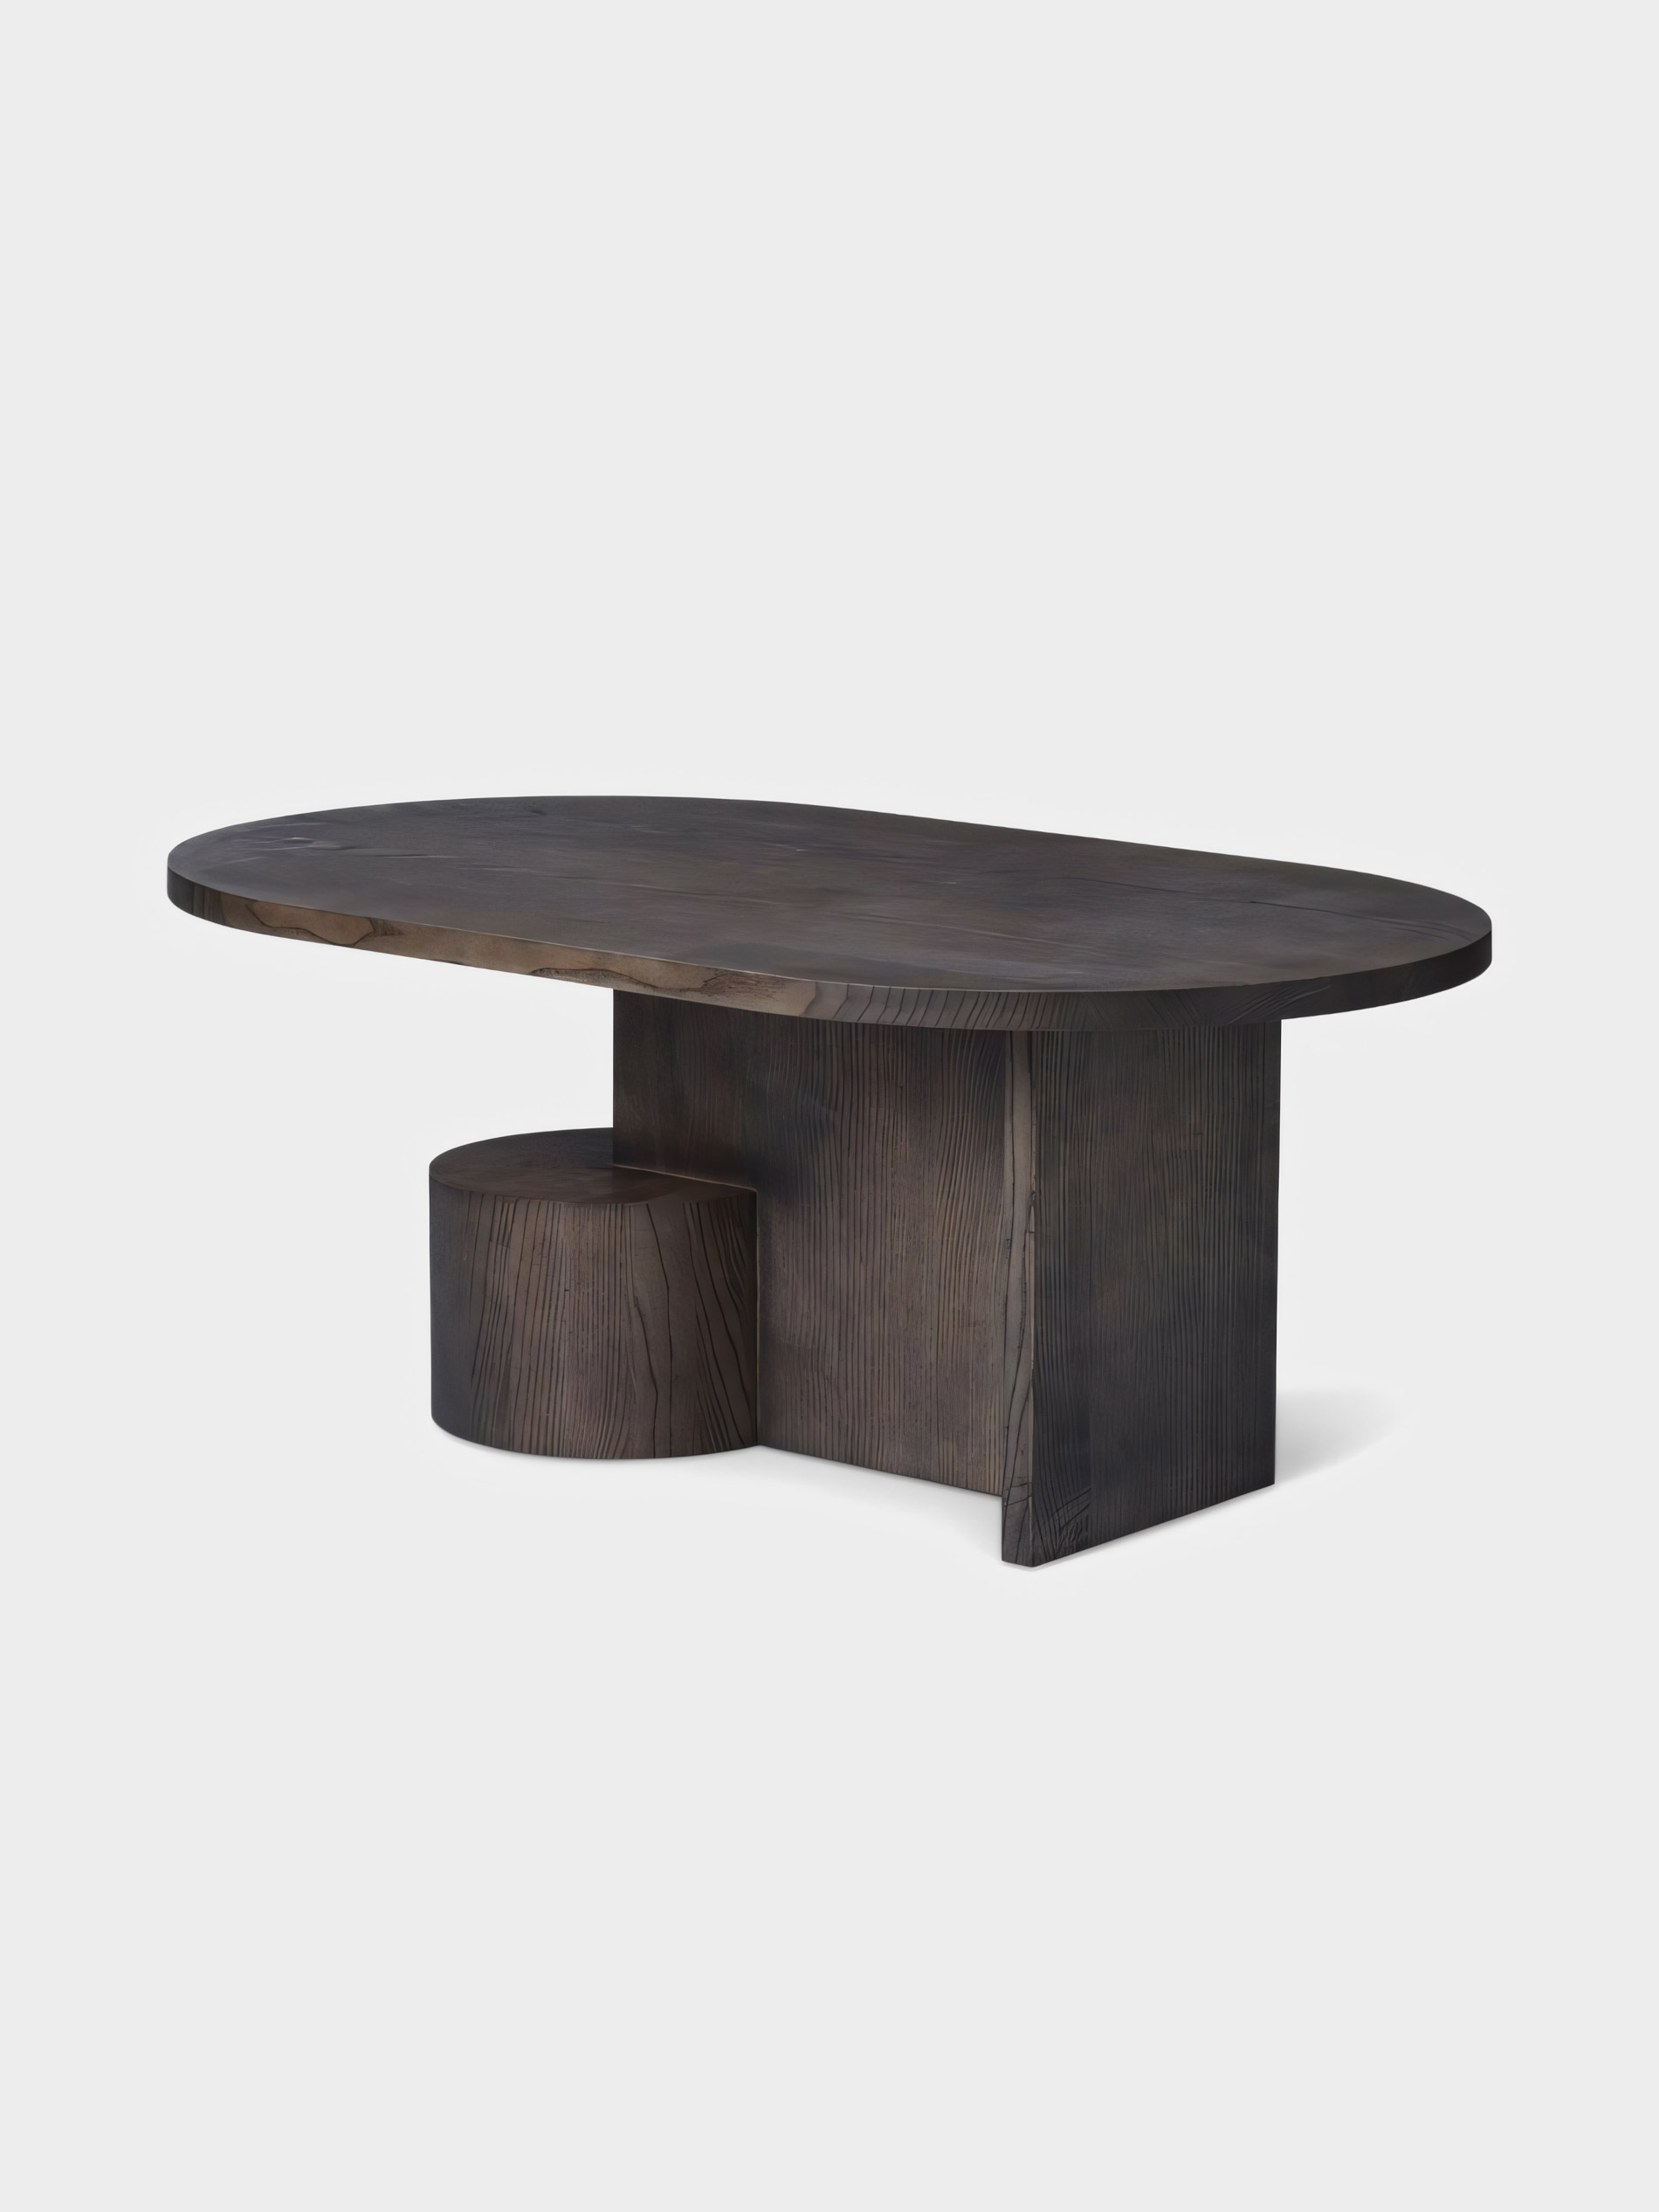 Minimalist Table Collection "Insert" by Mario Tsai for fermLiving